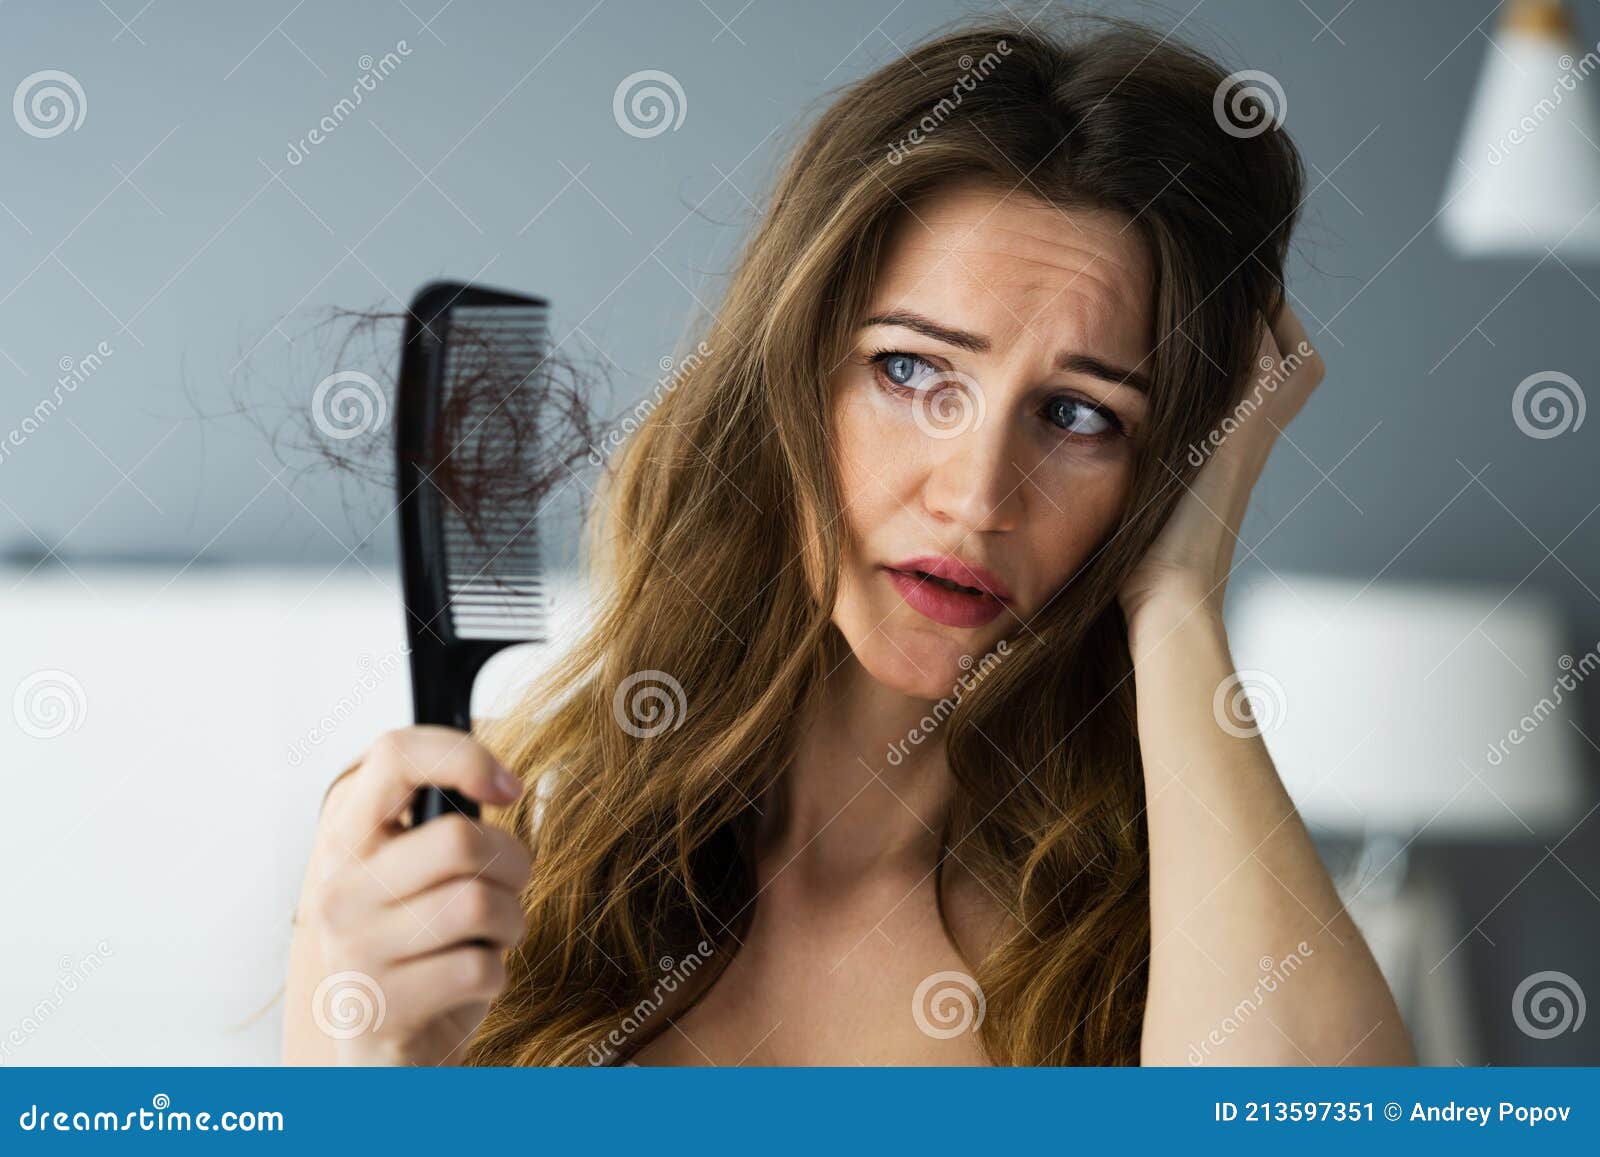 Woman Suffering from Hairloss Stock Image - Image of comb, hairloss:  213597351